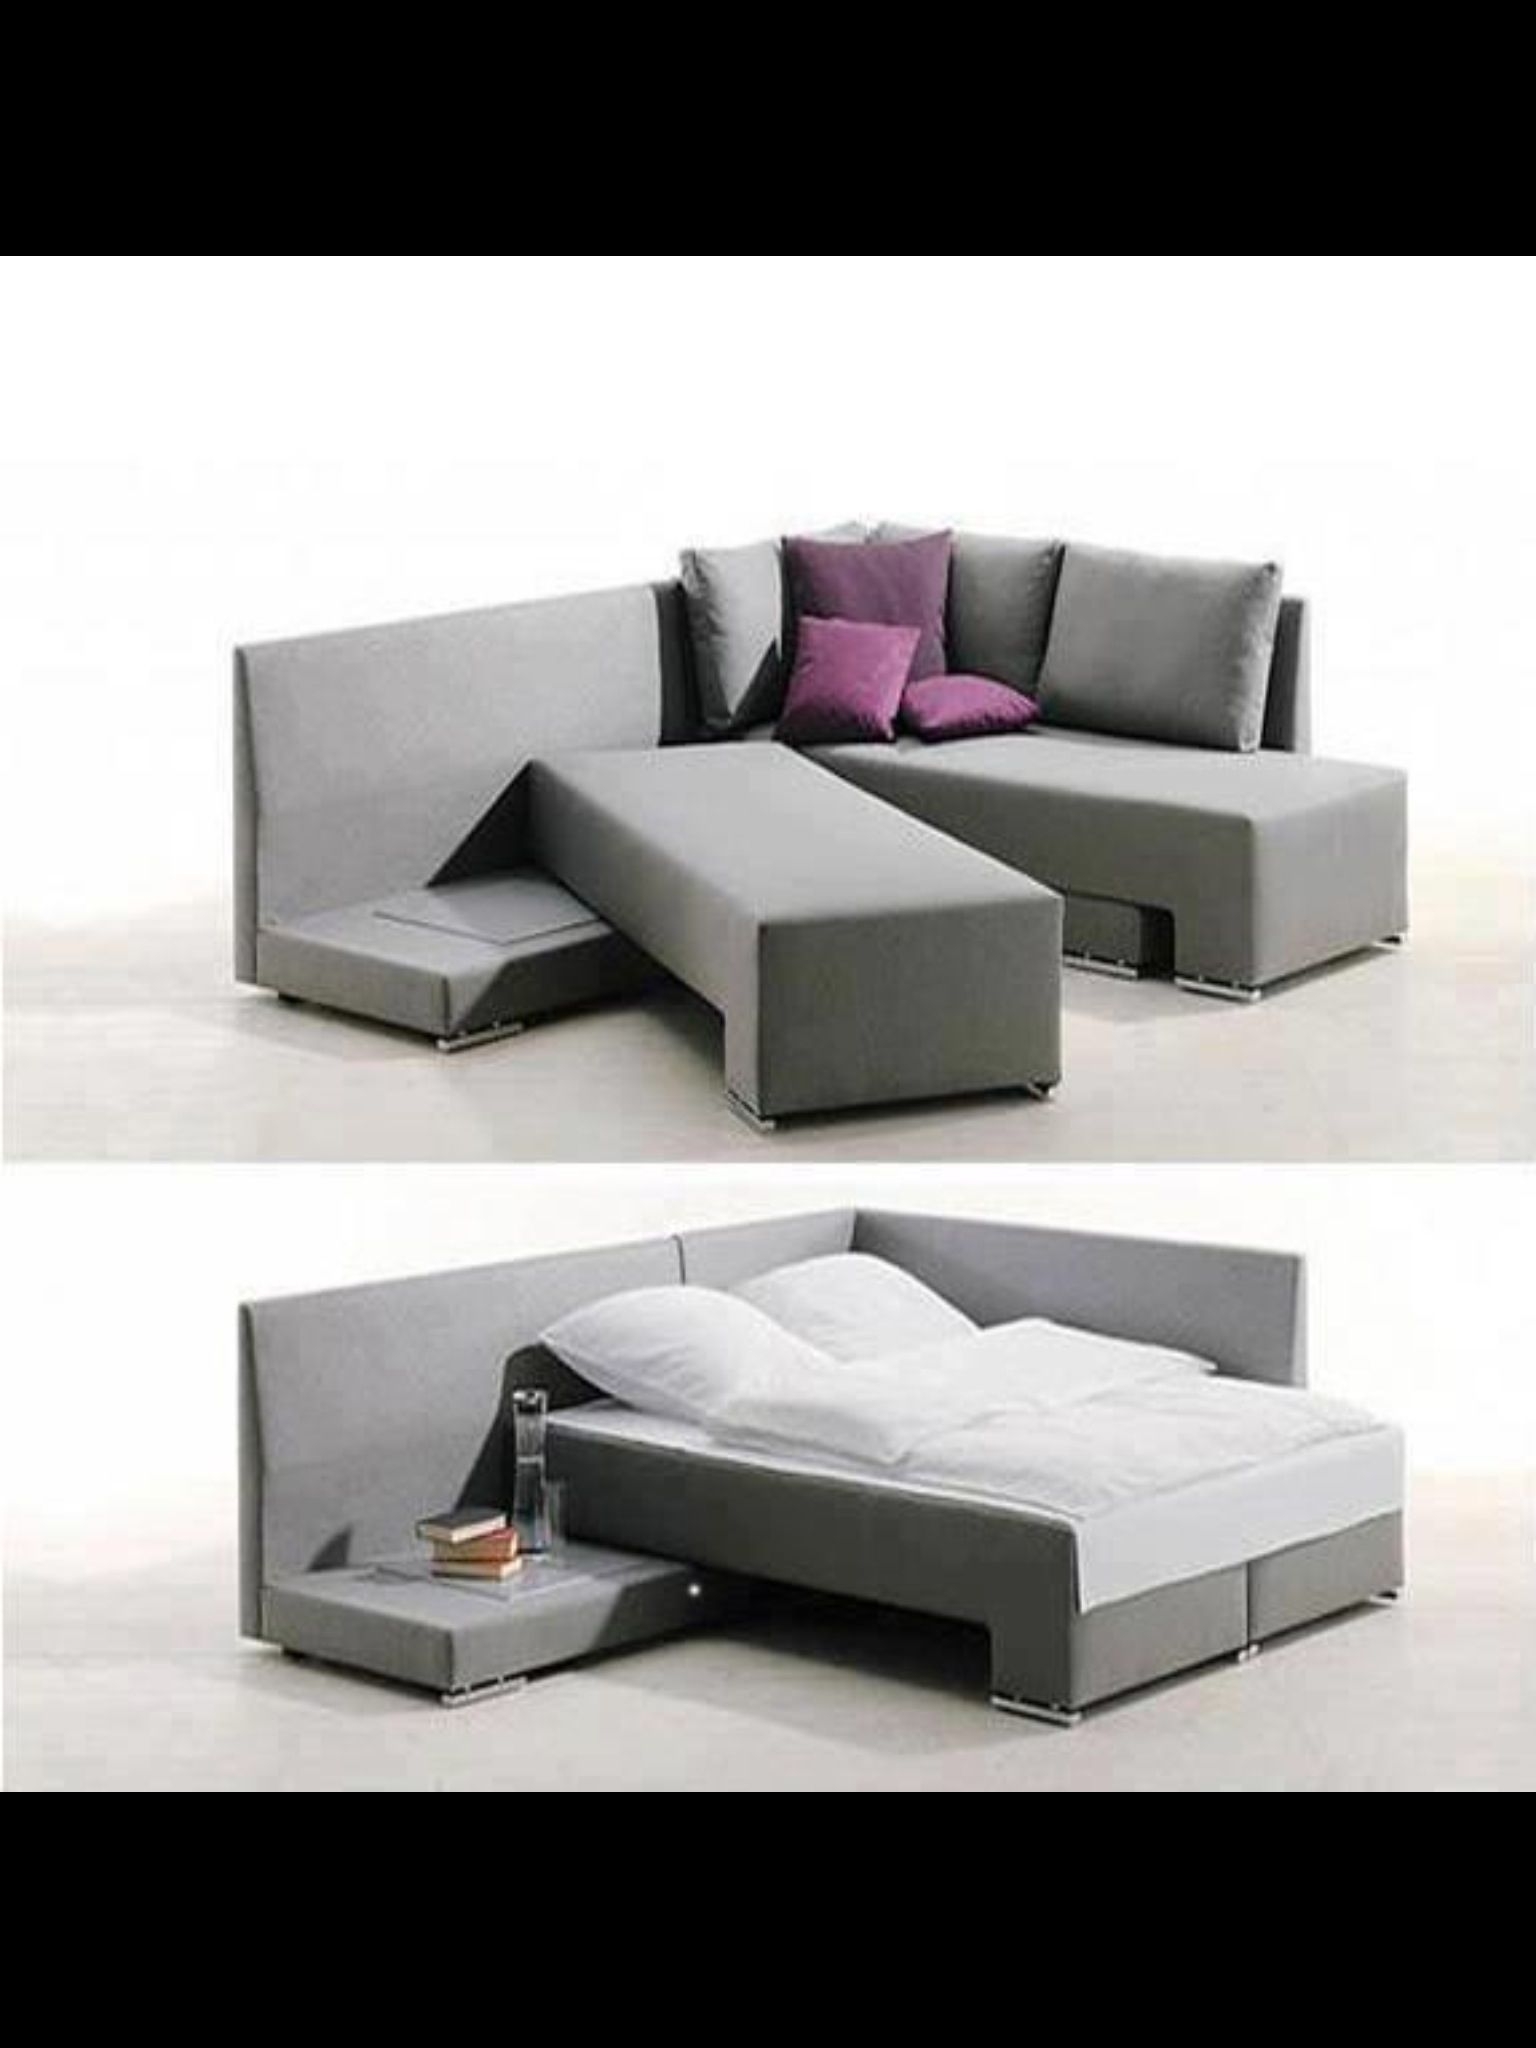 Modular sectional sofas for small spaces